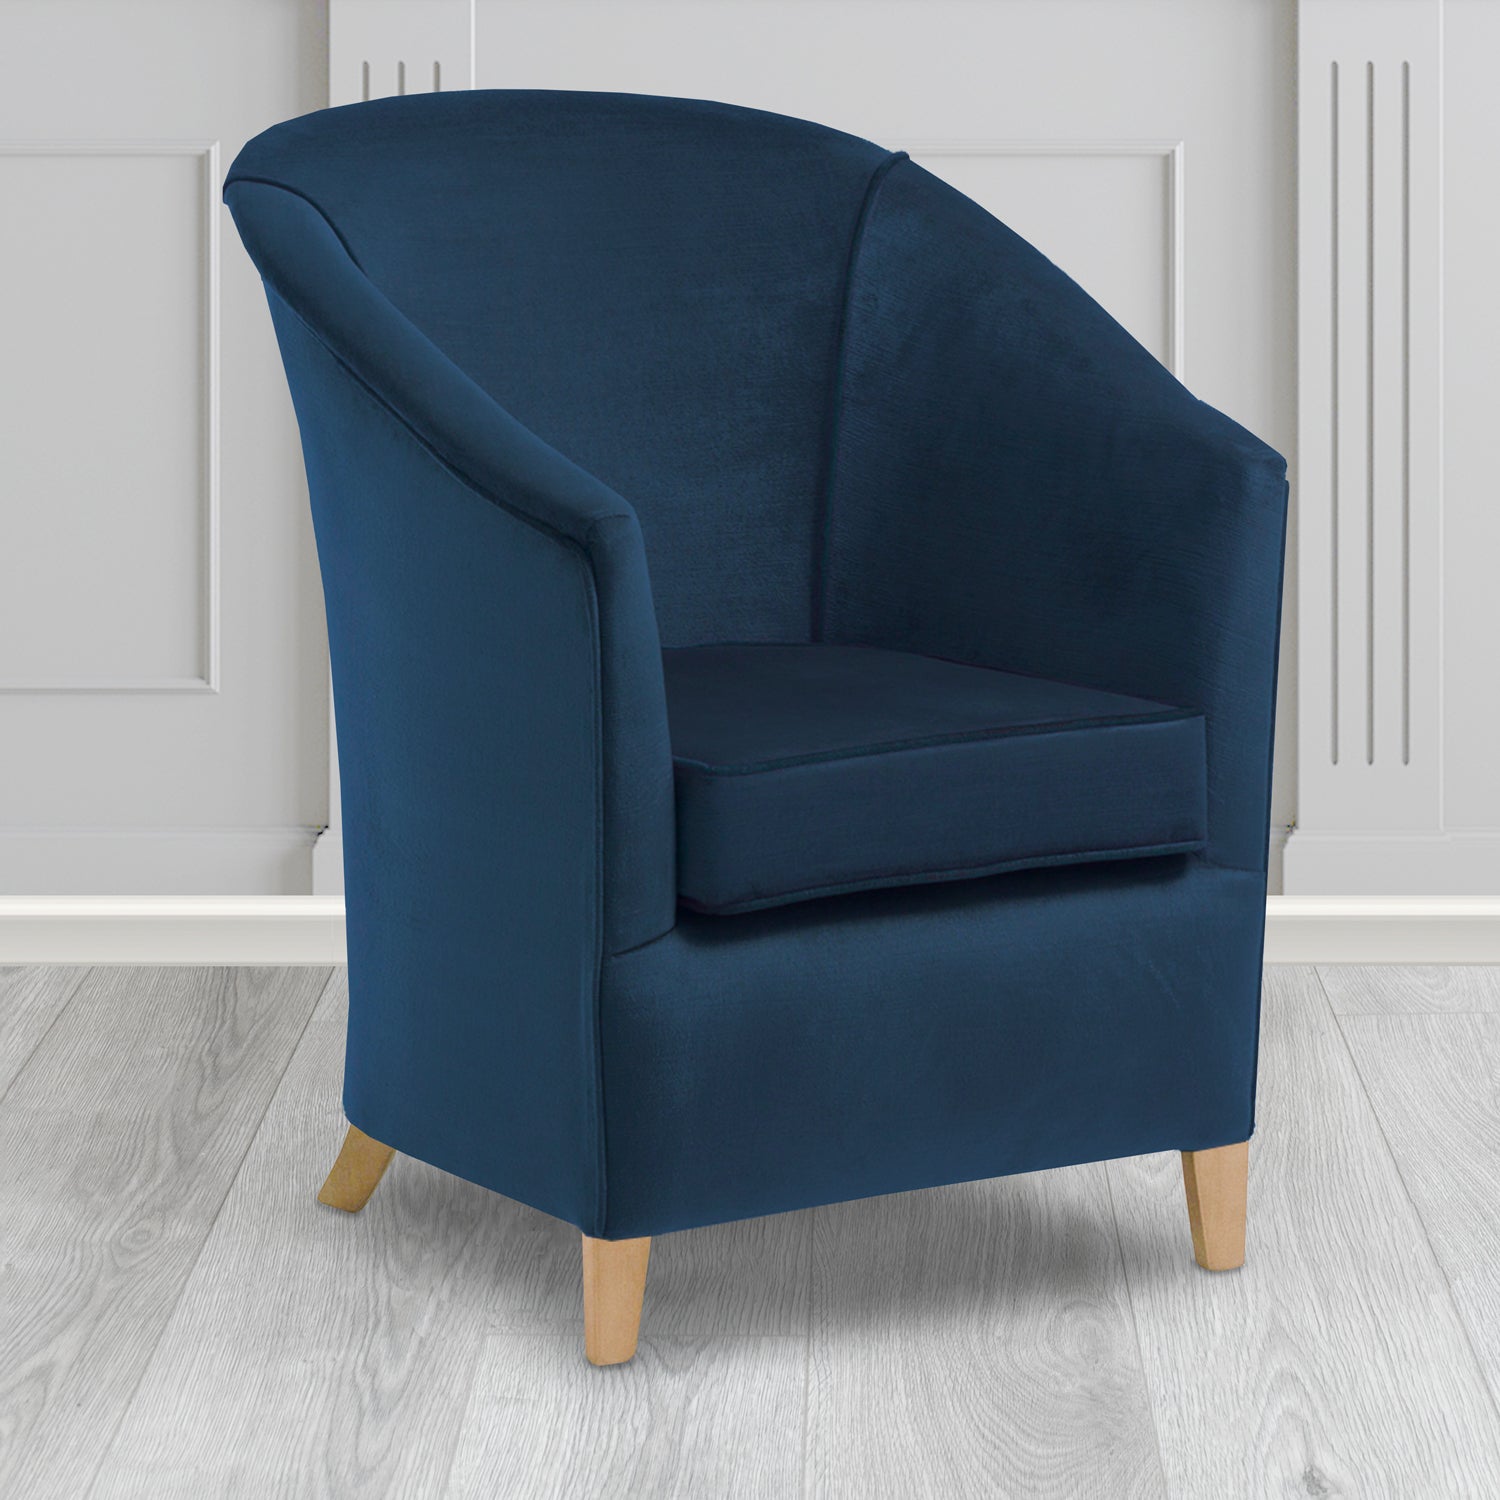 Bolton Tub Chair in Noble 133 Sapphire Crib 5 Velvet Fabric - Water Resistant - The Tub Chair Shop